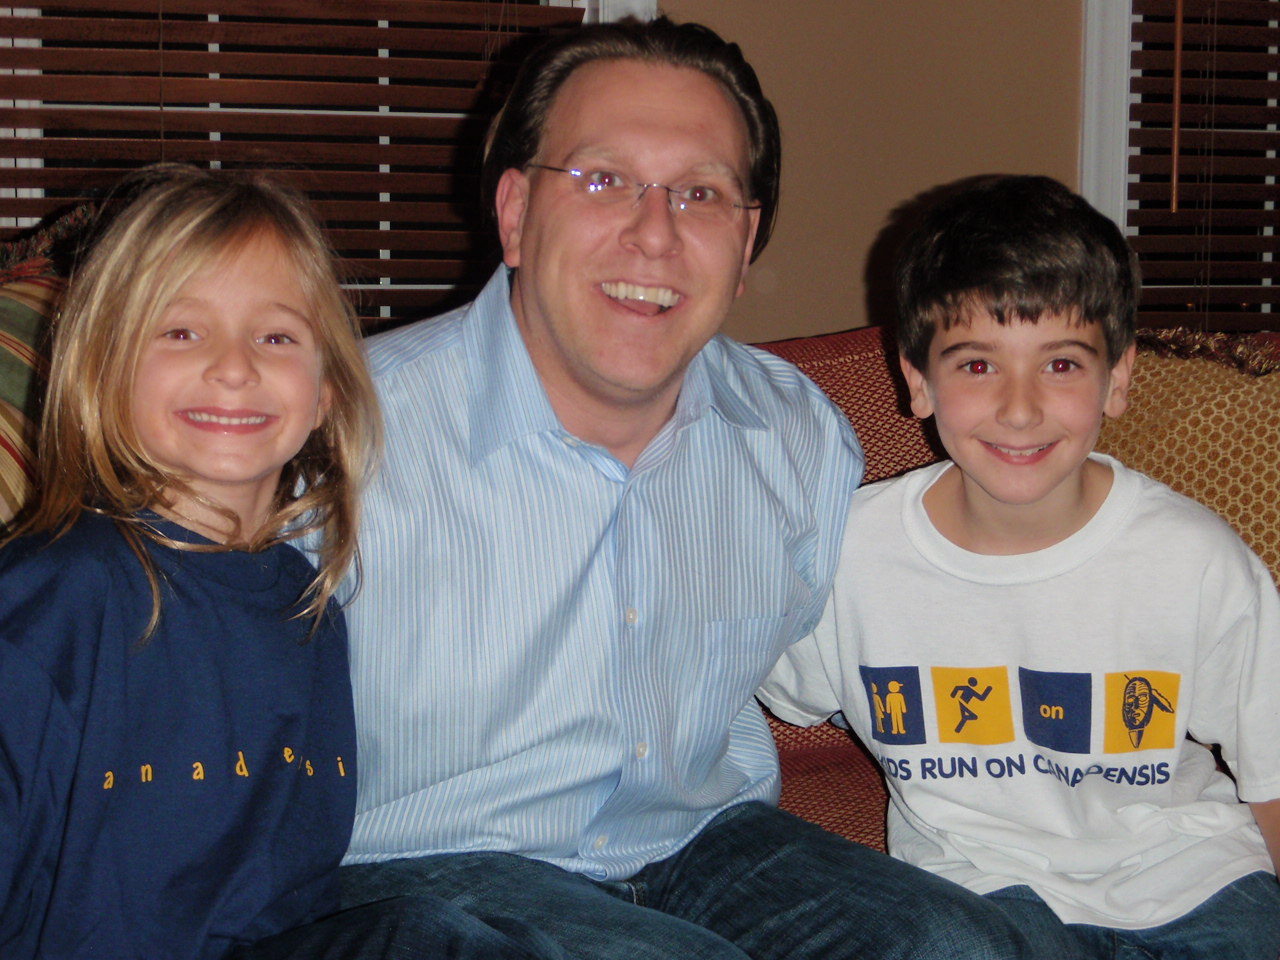 Me with David Brucker and sister, and future Canadensis camper, Marissa Brucker.